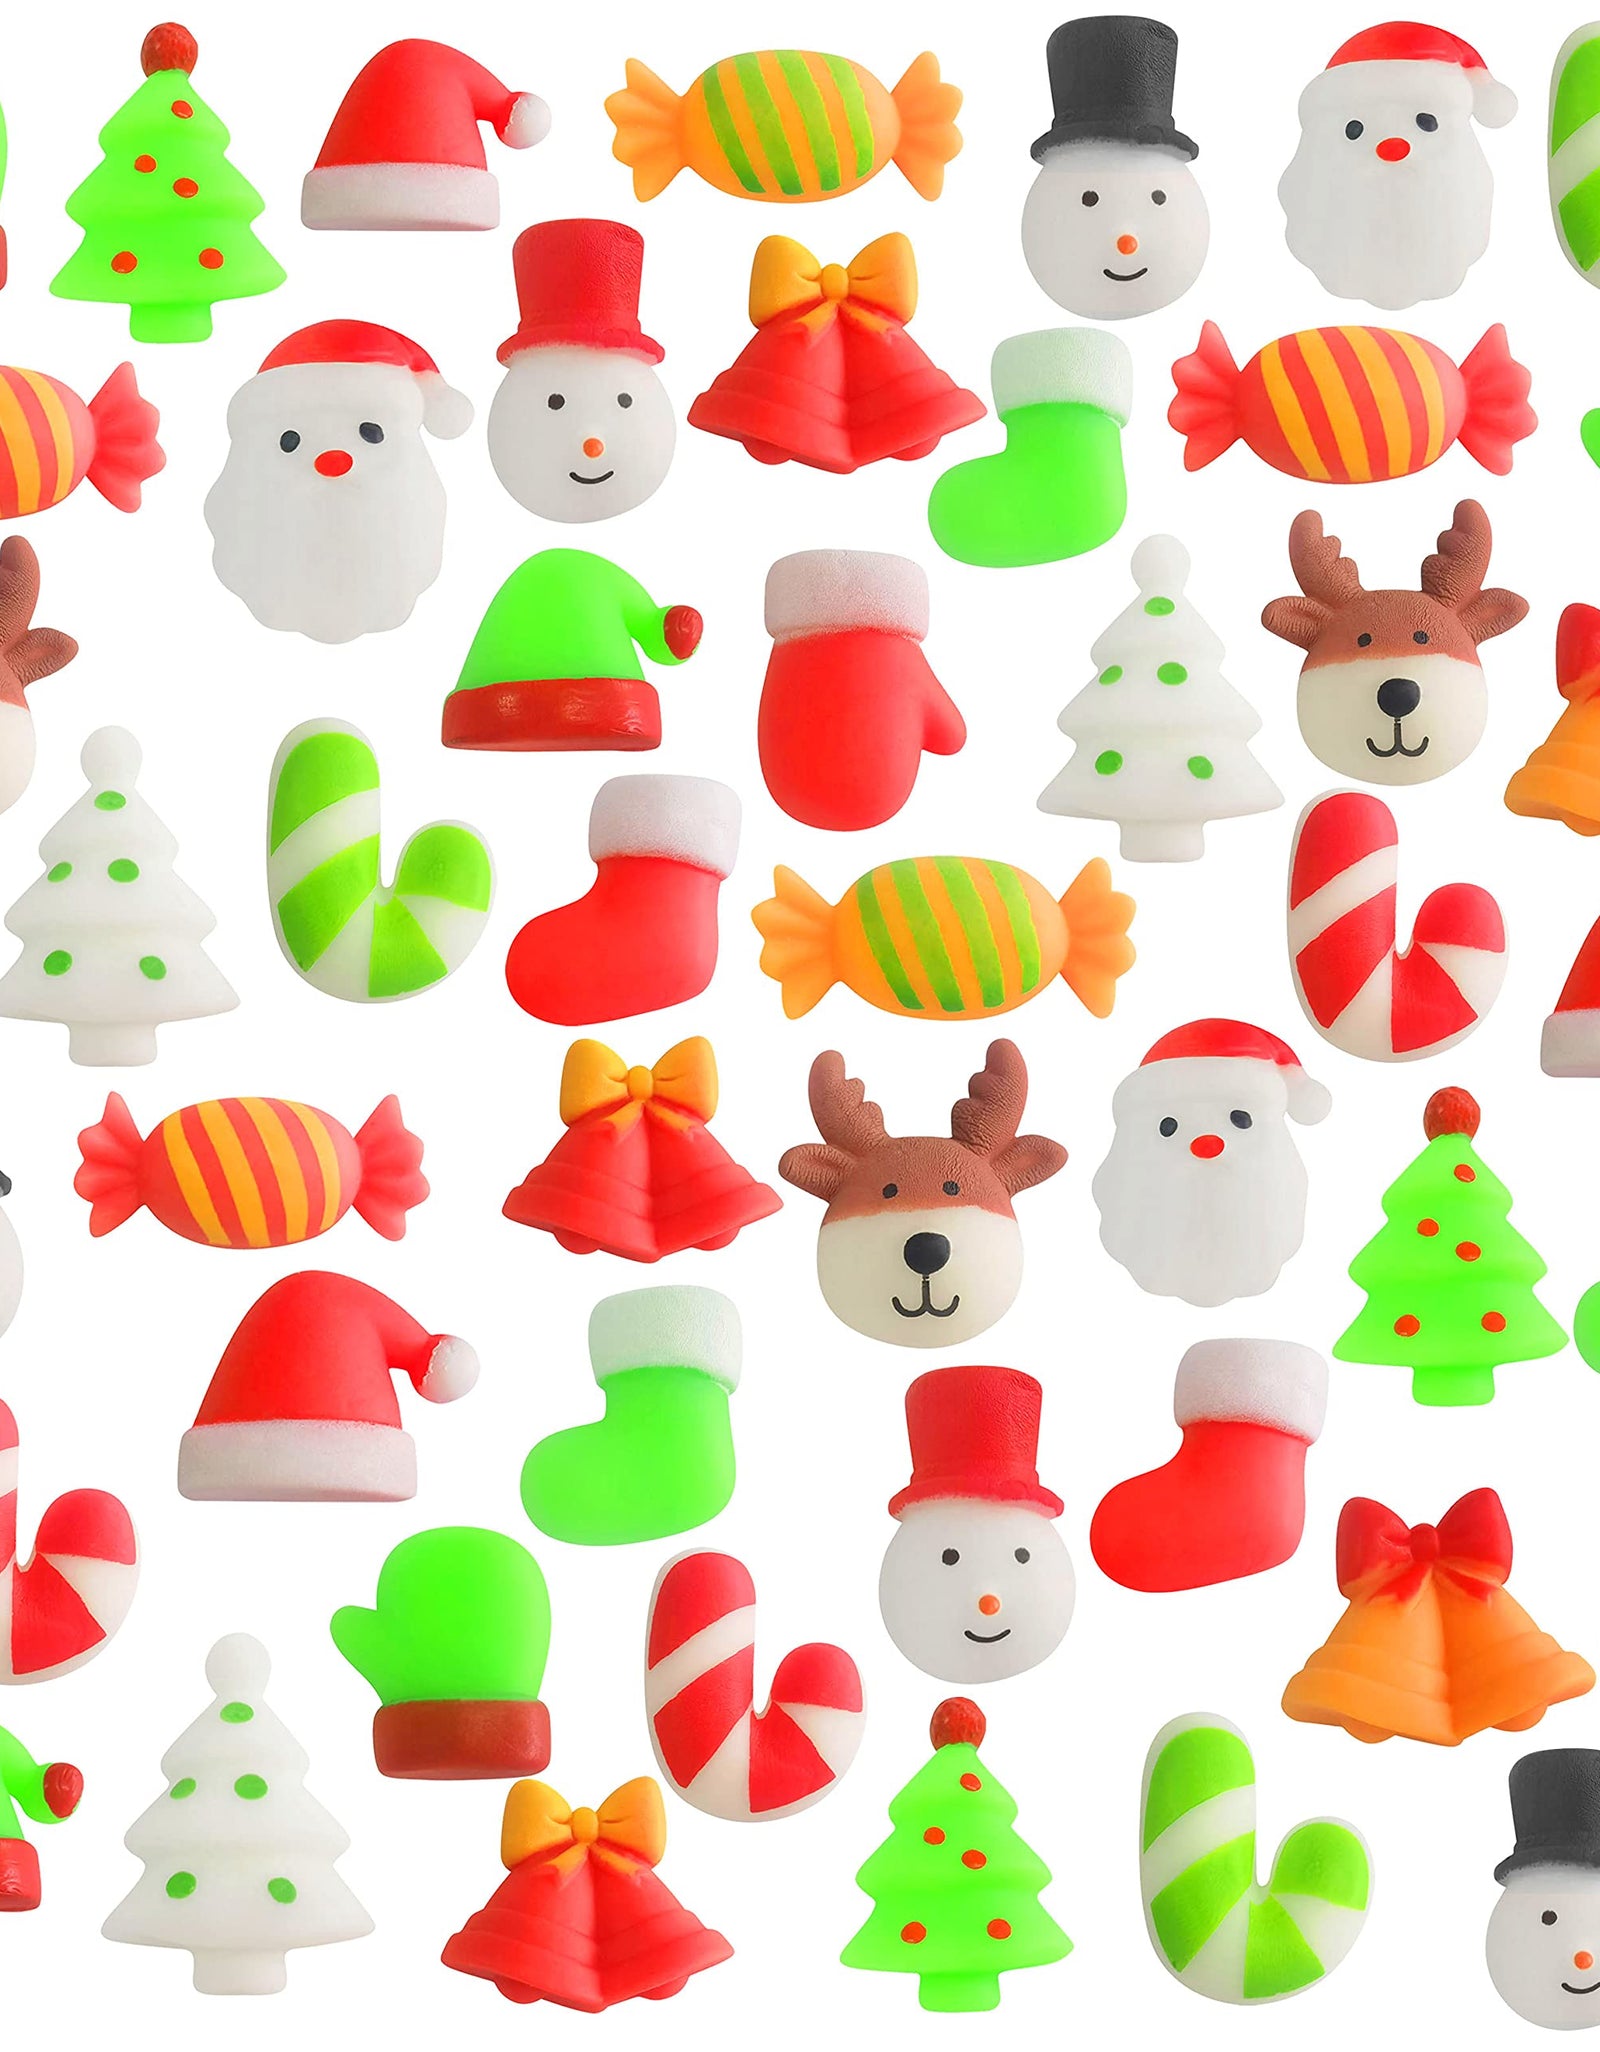 48 Pcs Christmas Mochi Squishy Toys,Mini Kawaii Squeeze Toy Stress Reliever Anxiety Packs for Kid Party Favors,Christmas Miniatures (Christmas)